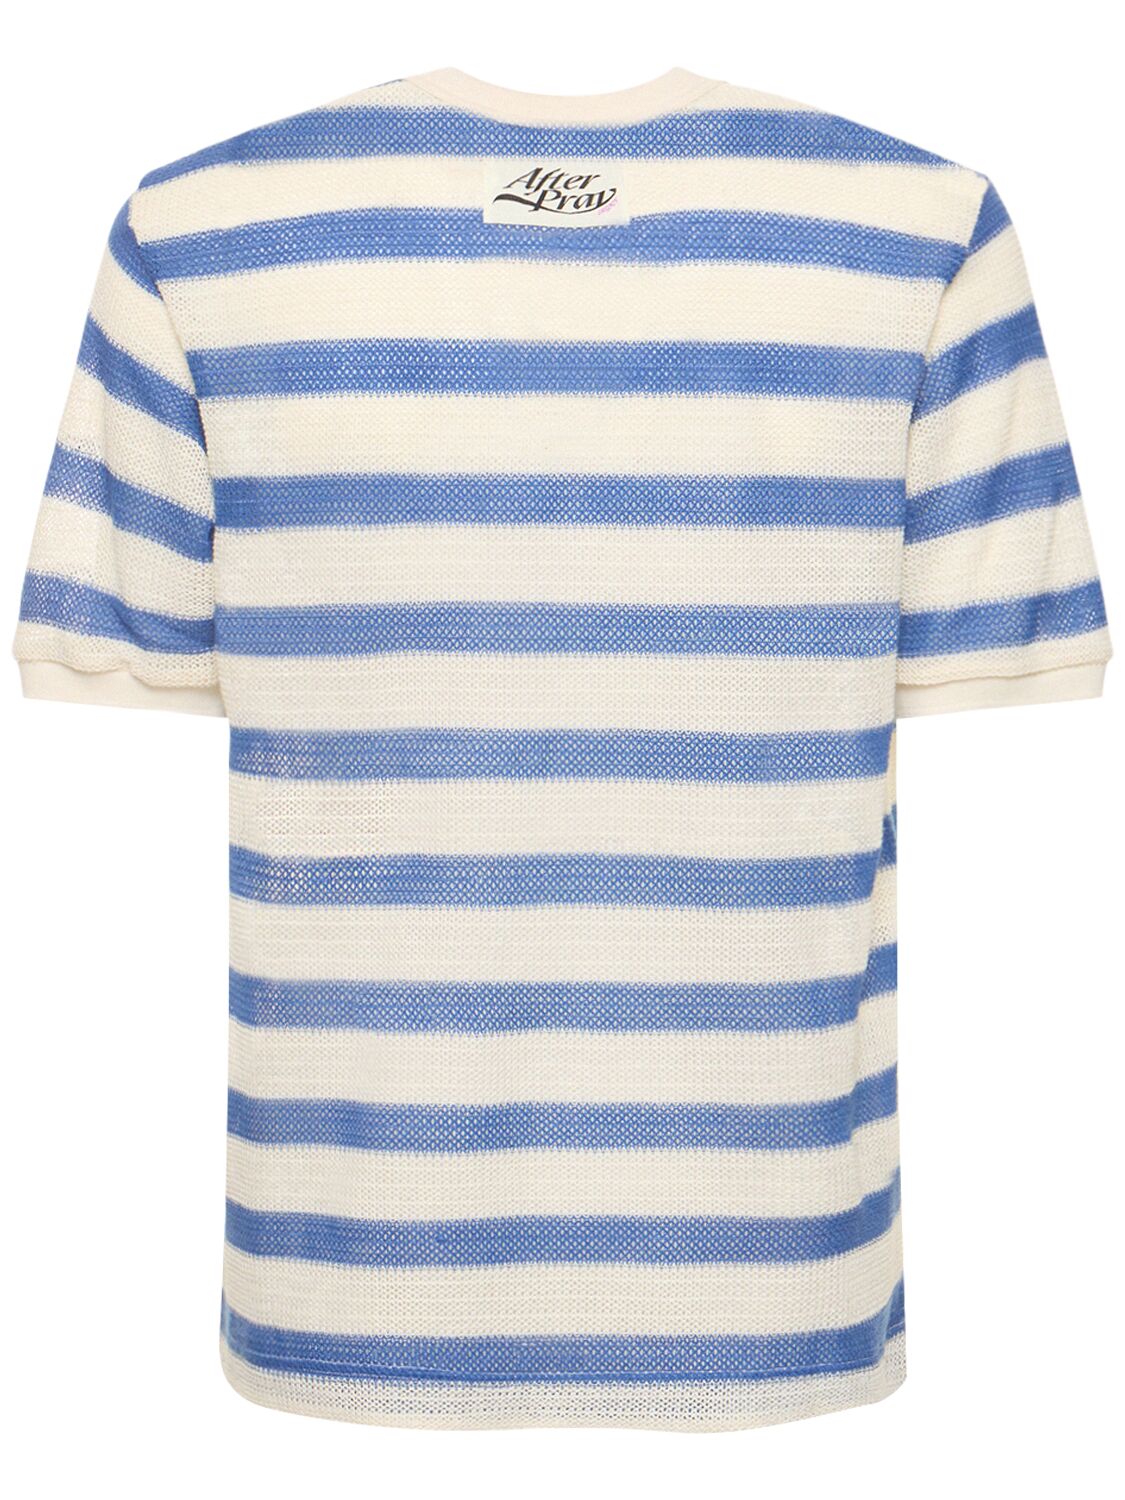 Shop After Pray Striped Mesh Knit T-shirt In Blue